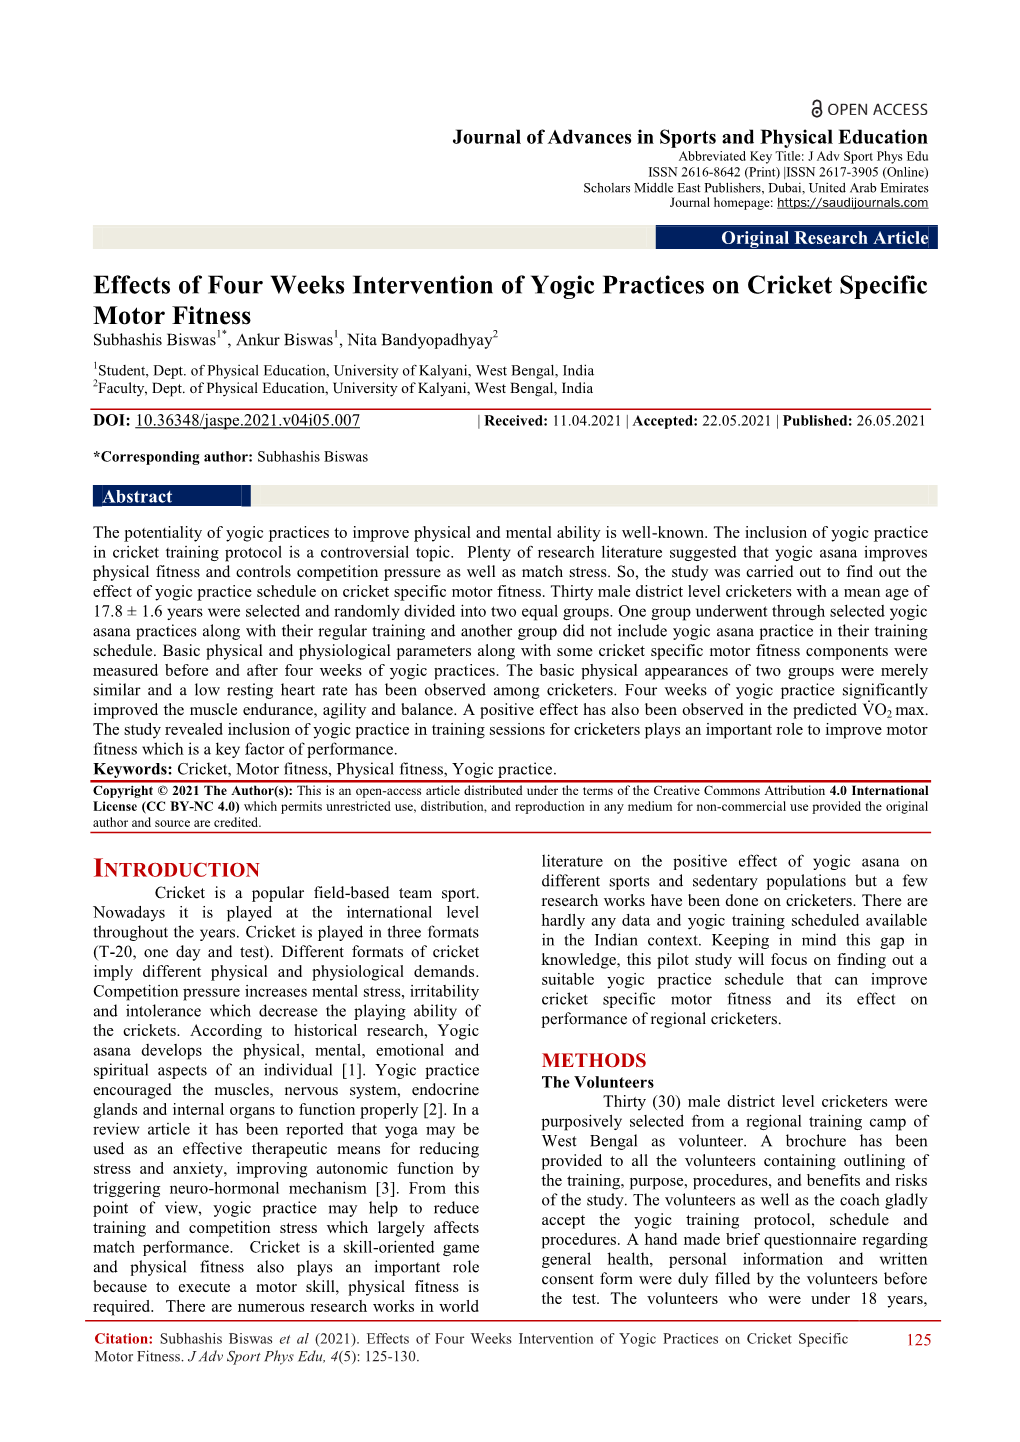 Effects of Four Weeks Intervention of Yogic Practices on Cricket Specific Motor Fitness Subhashis Biswas1*, Ankur Biswas1, Nita Bandyopadhyay2